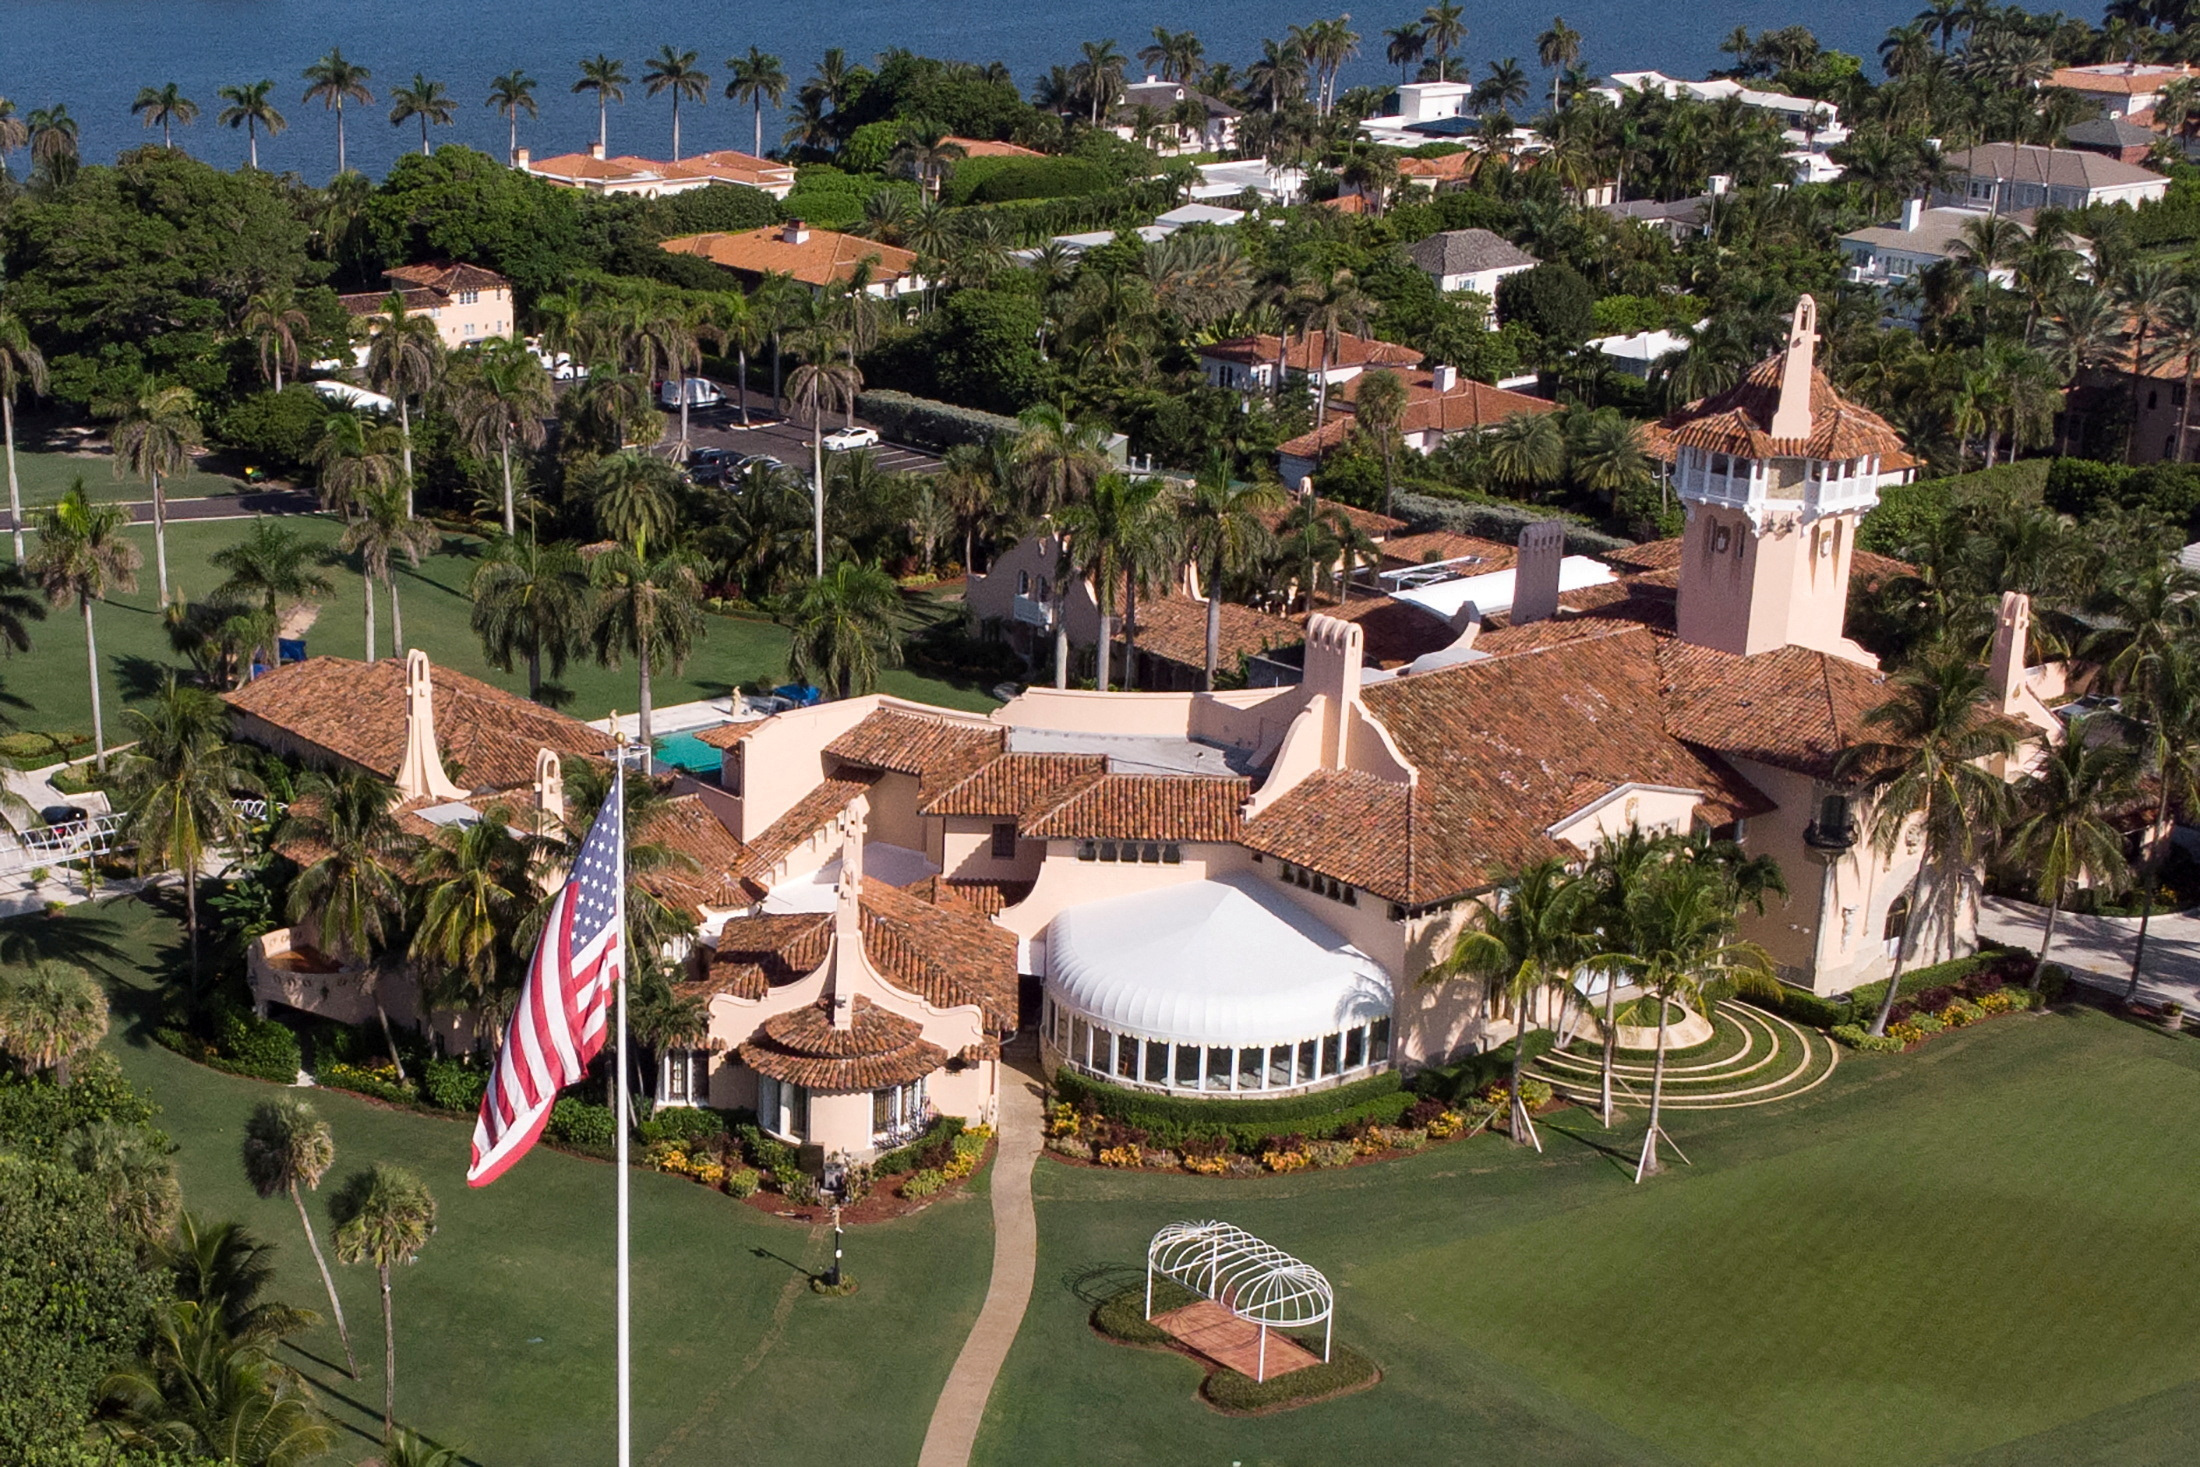 An aerial view of former U.S. President Donald Trump's Mar-a-Lago home in Palm Beach